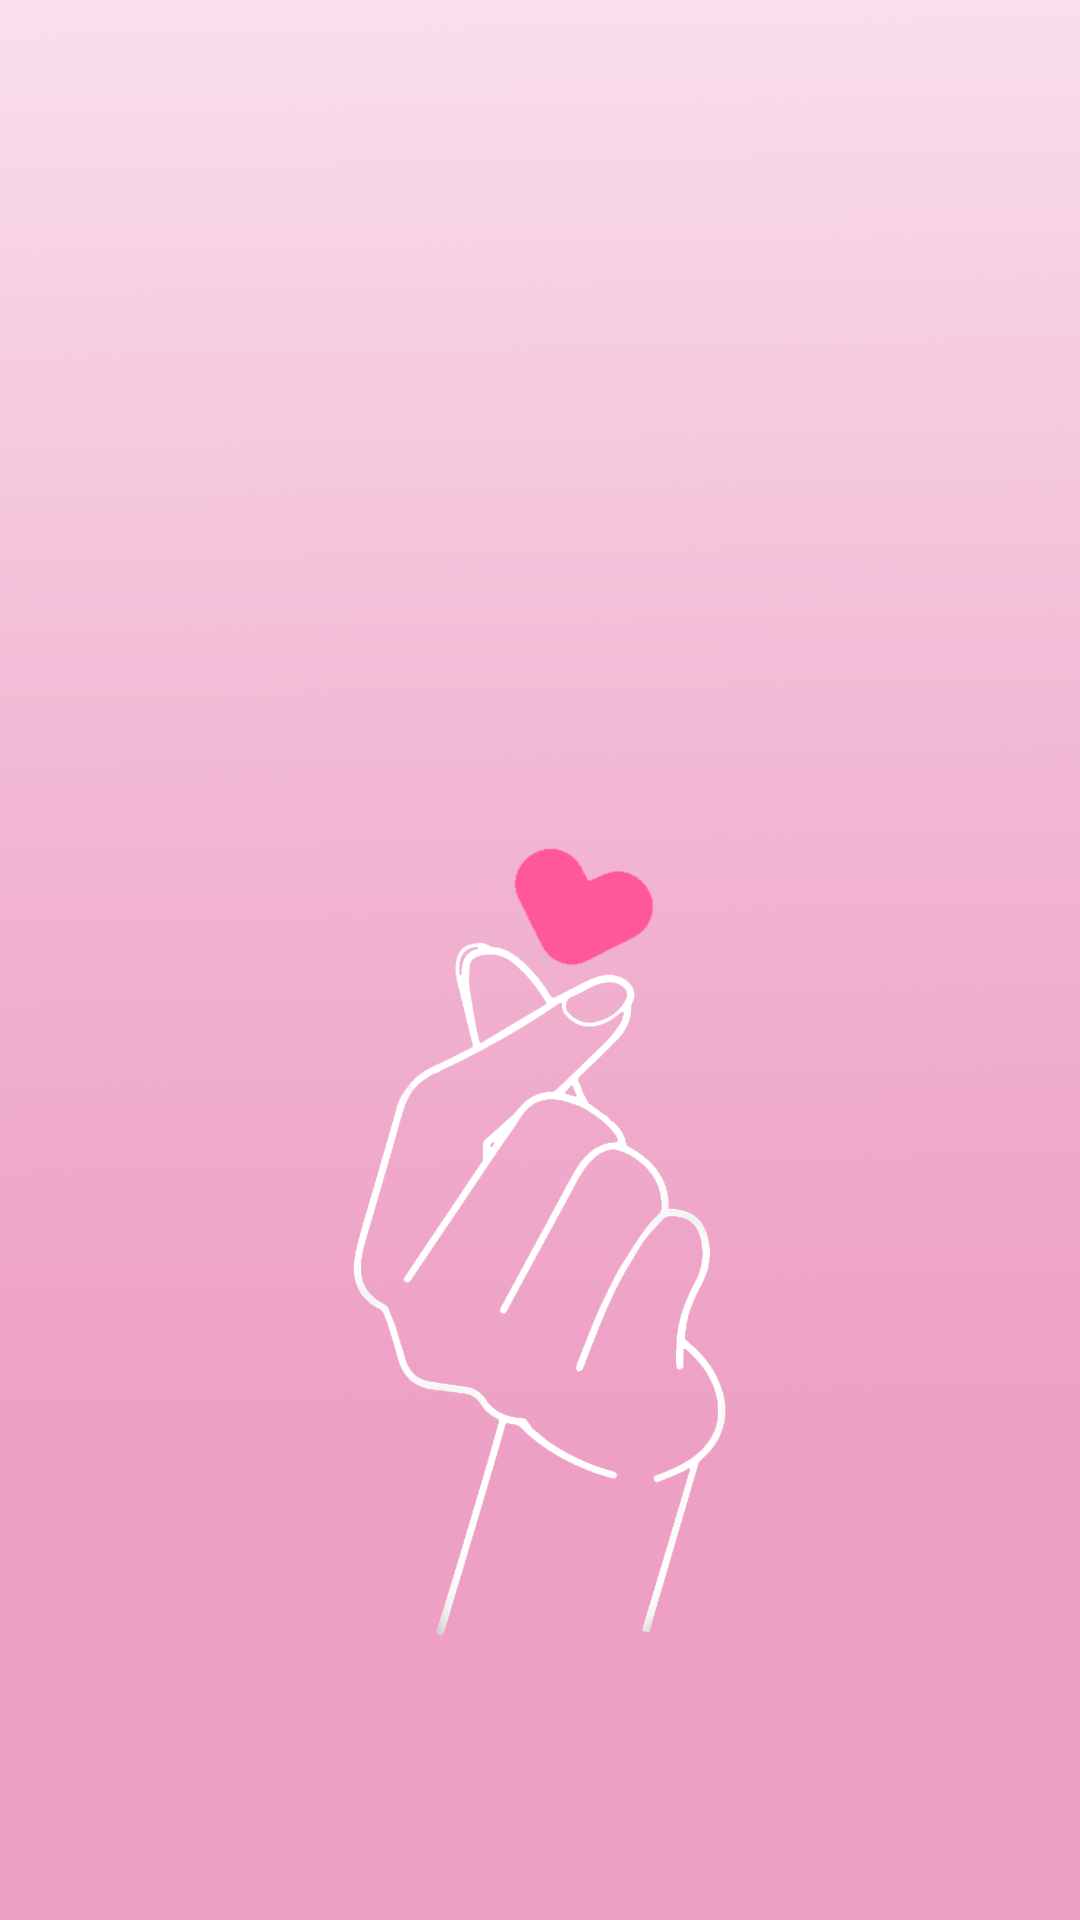 4K Finger Heart Wallpapers HD:Amazon.co.uk:Appstore for Android